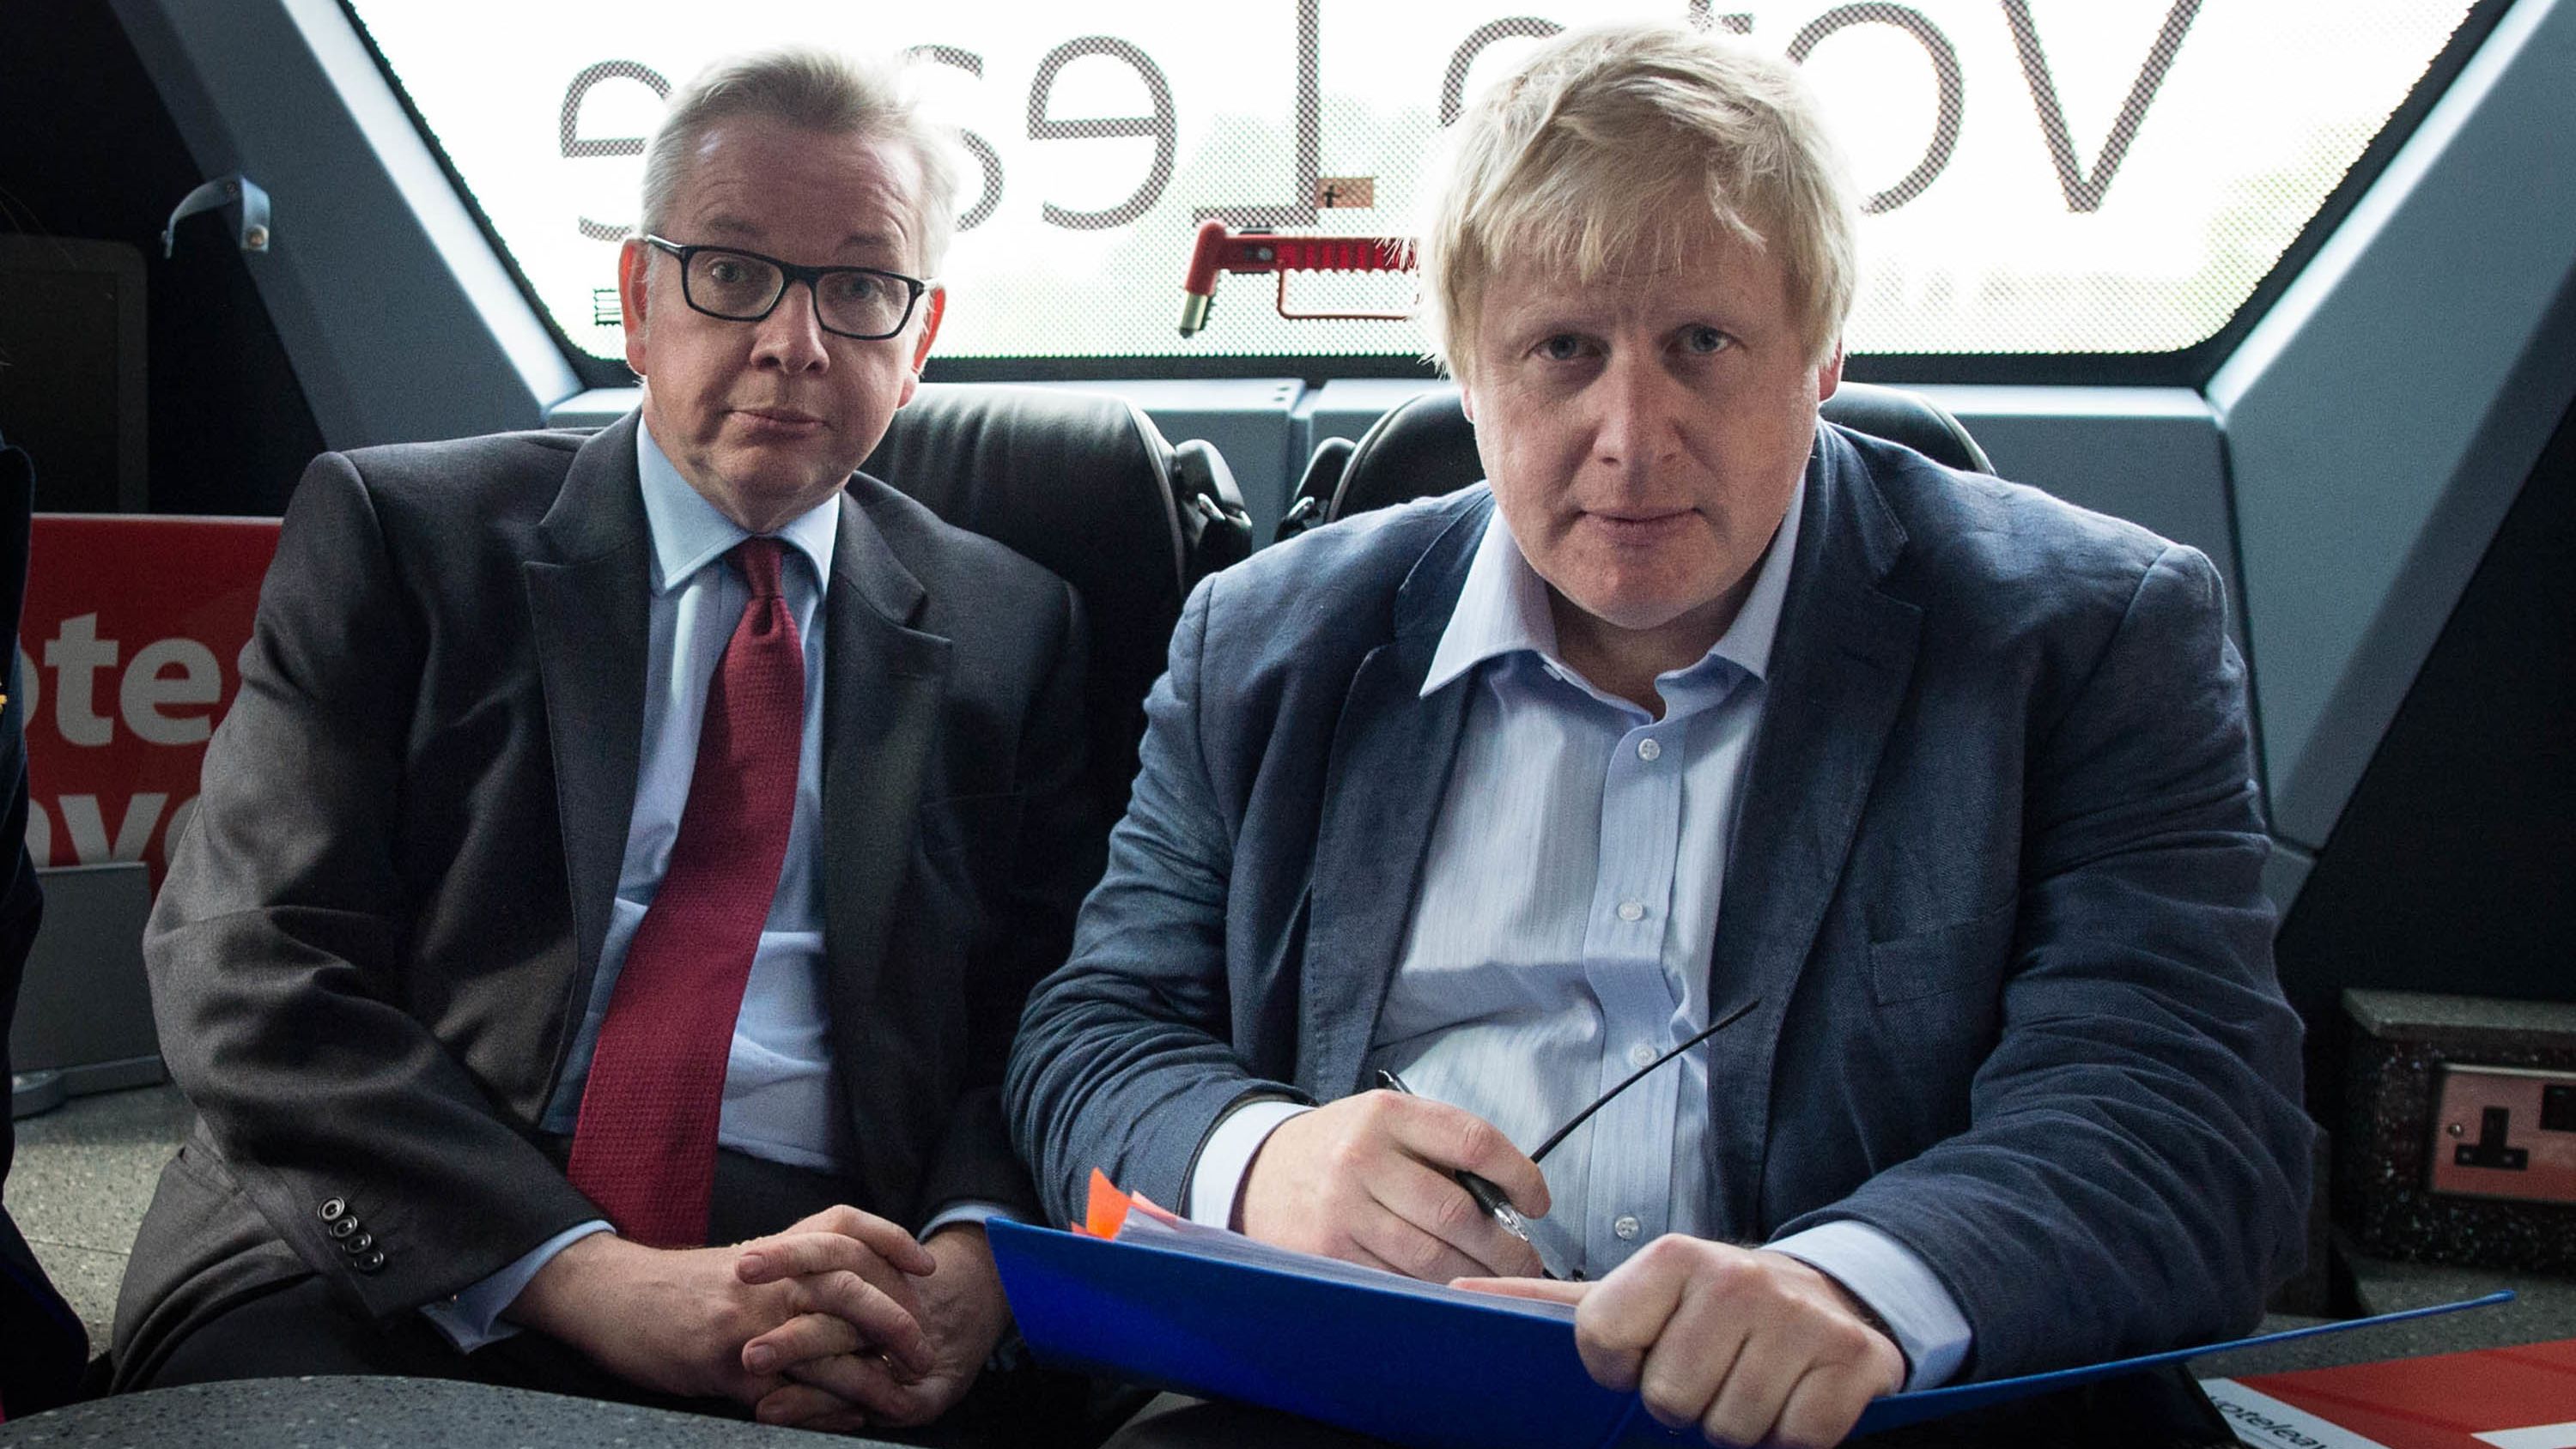 Johnson and Michael Gove ride on a "Vote Leave" campaign bus in June 2016.